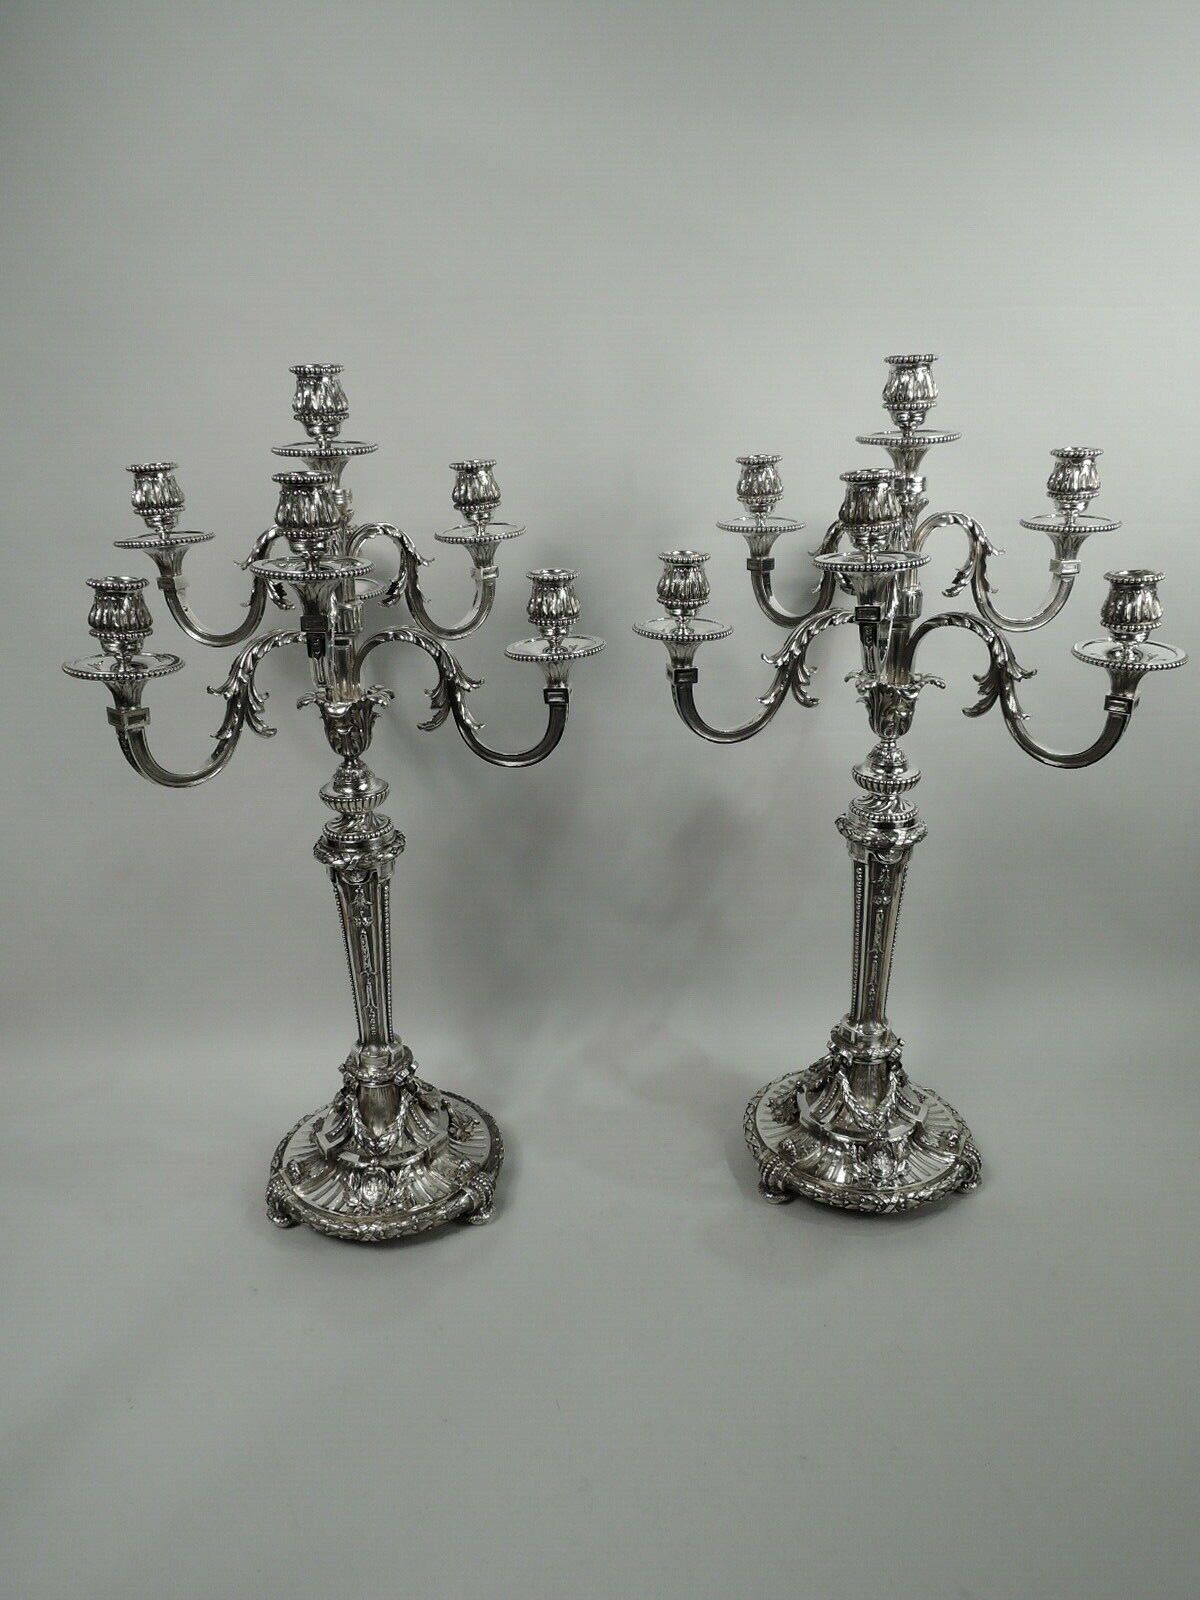 Antique Candelabra 7-Light Belle Epoque Neoclassical Pair French 950 Silver French